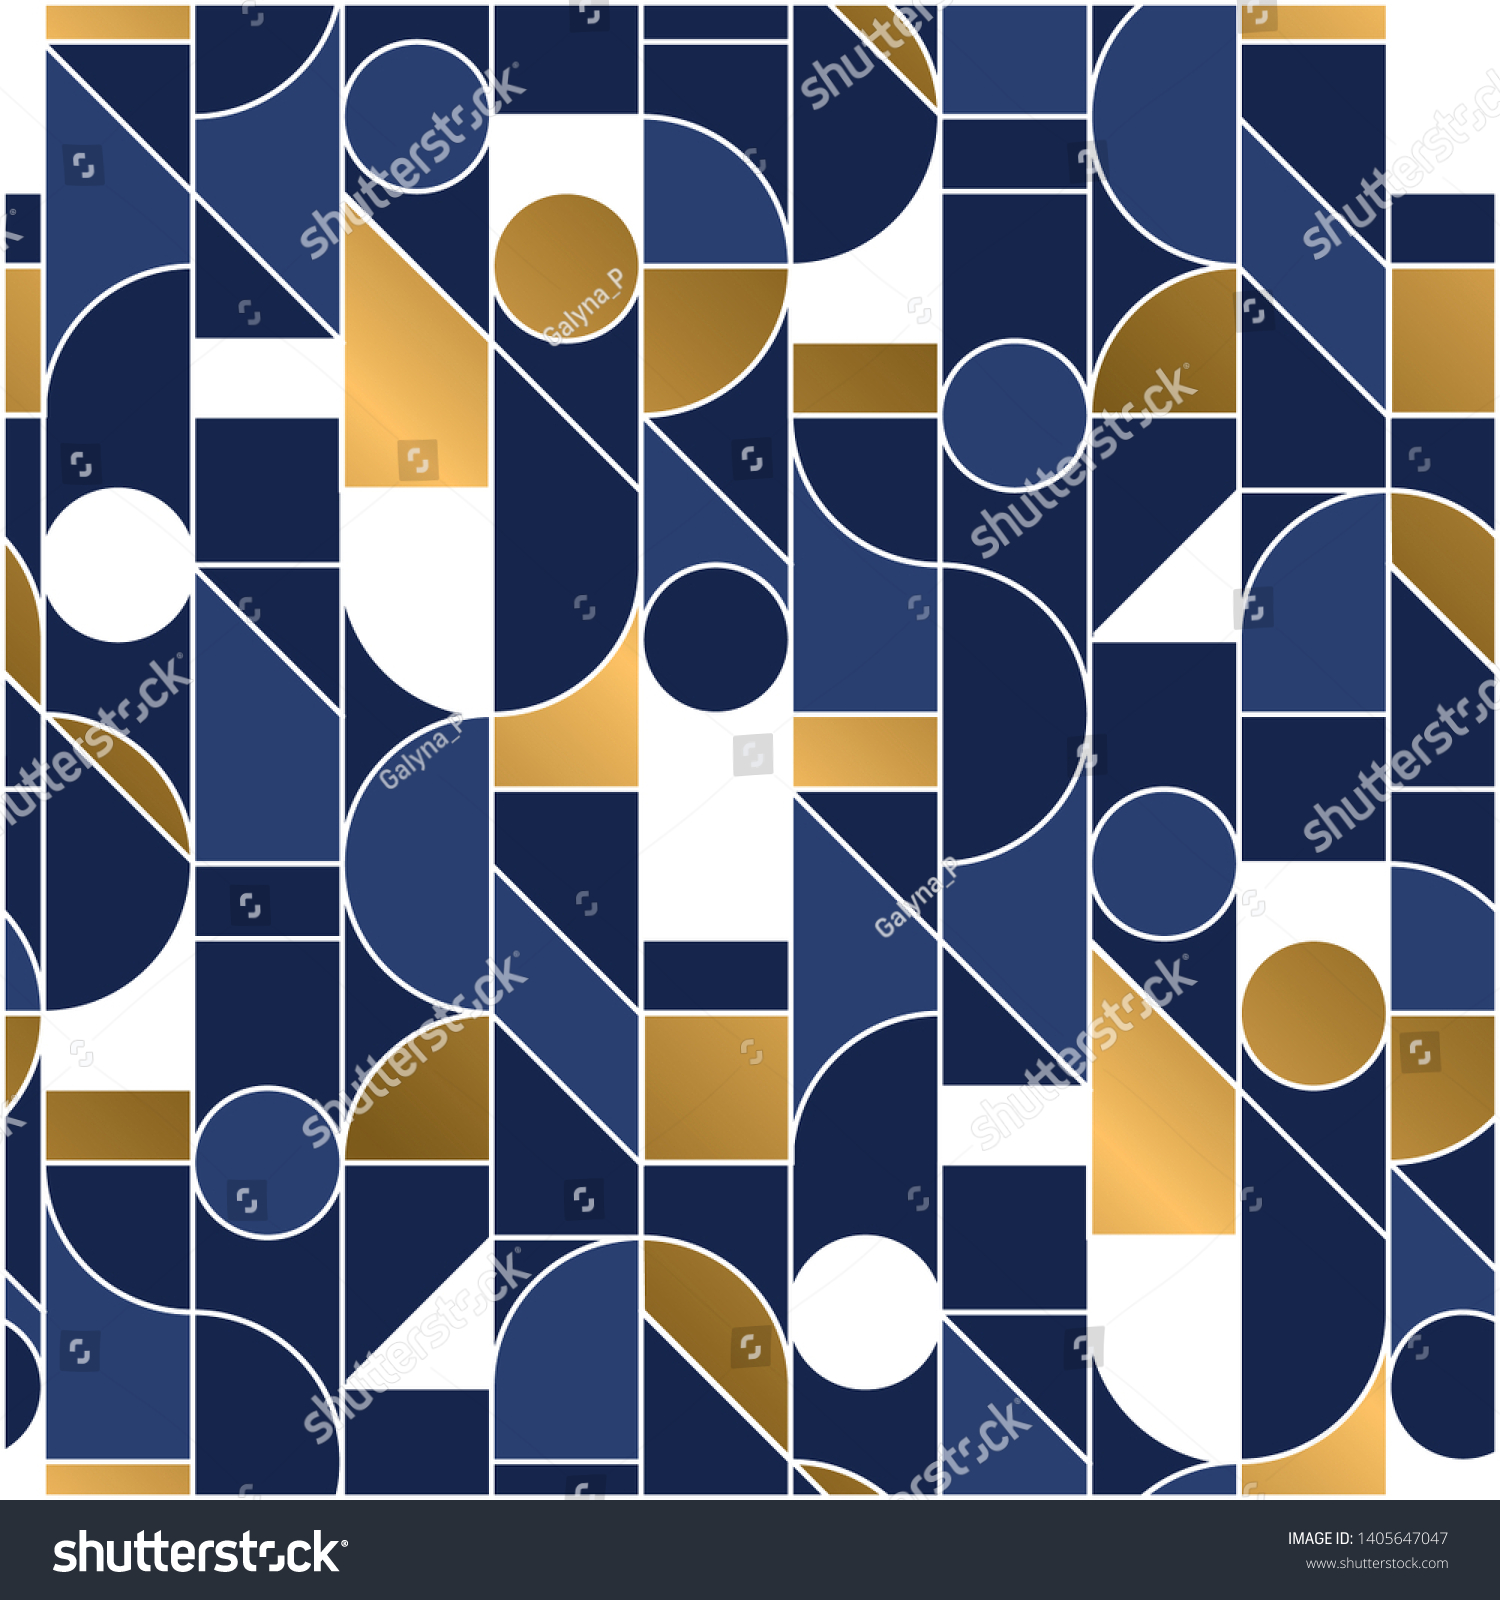 Luxury masculine marine blue and gold geometric outline shapes seamless pattern. Retro line geometry 70s chic repeatable motif for fabric, background, surface design, textile. Tile rapport vector #1405647047